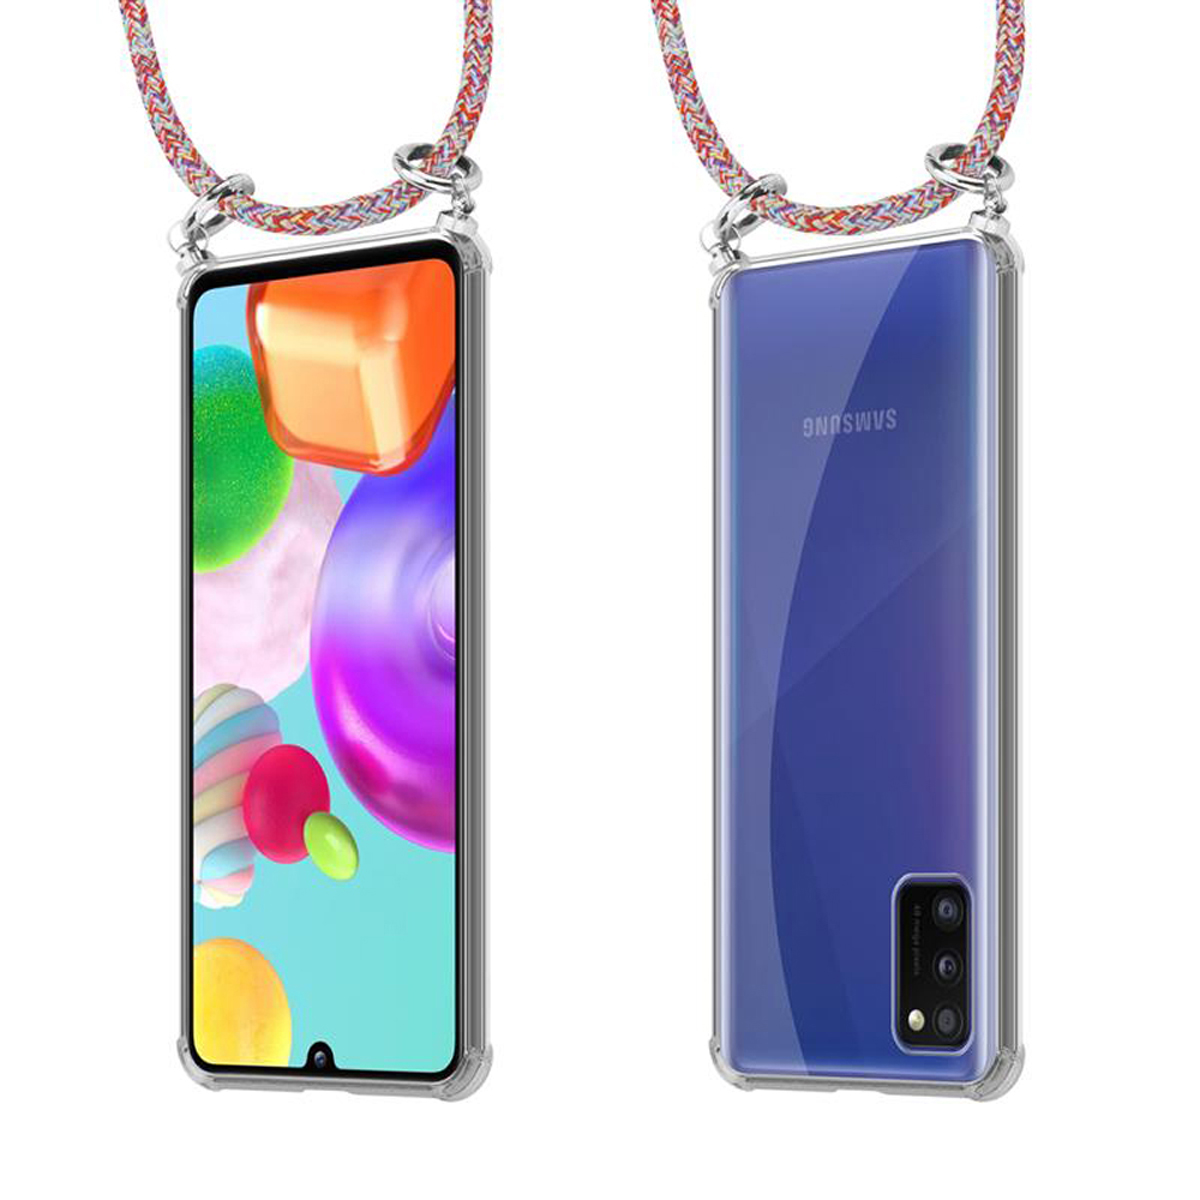 PARROT Samsung, und Backcover, Band Kette abnehmbarer A41, Handy mit Ringen, Hülle, CADORABO COLORFUL Kordel Silber Galaxy